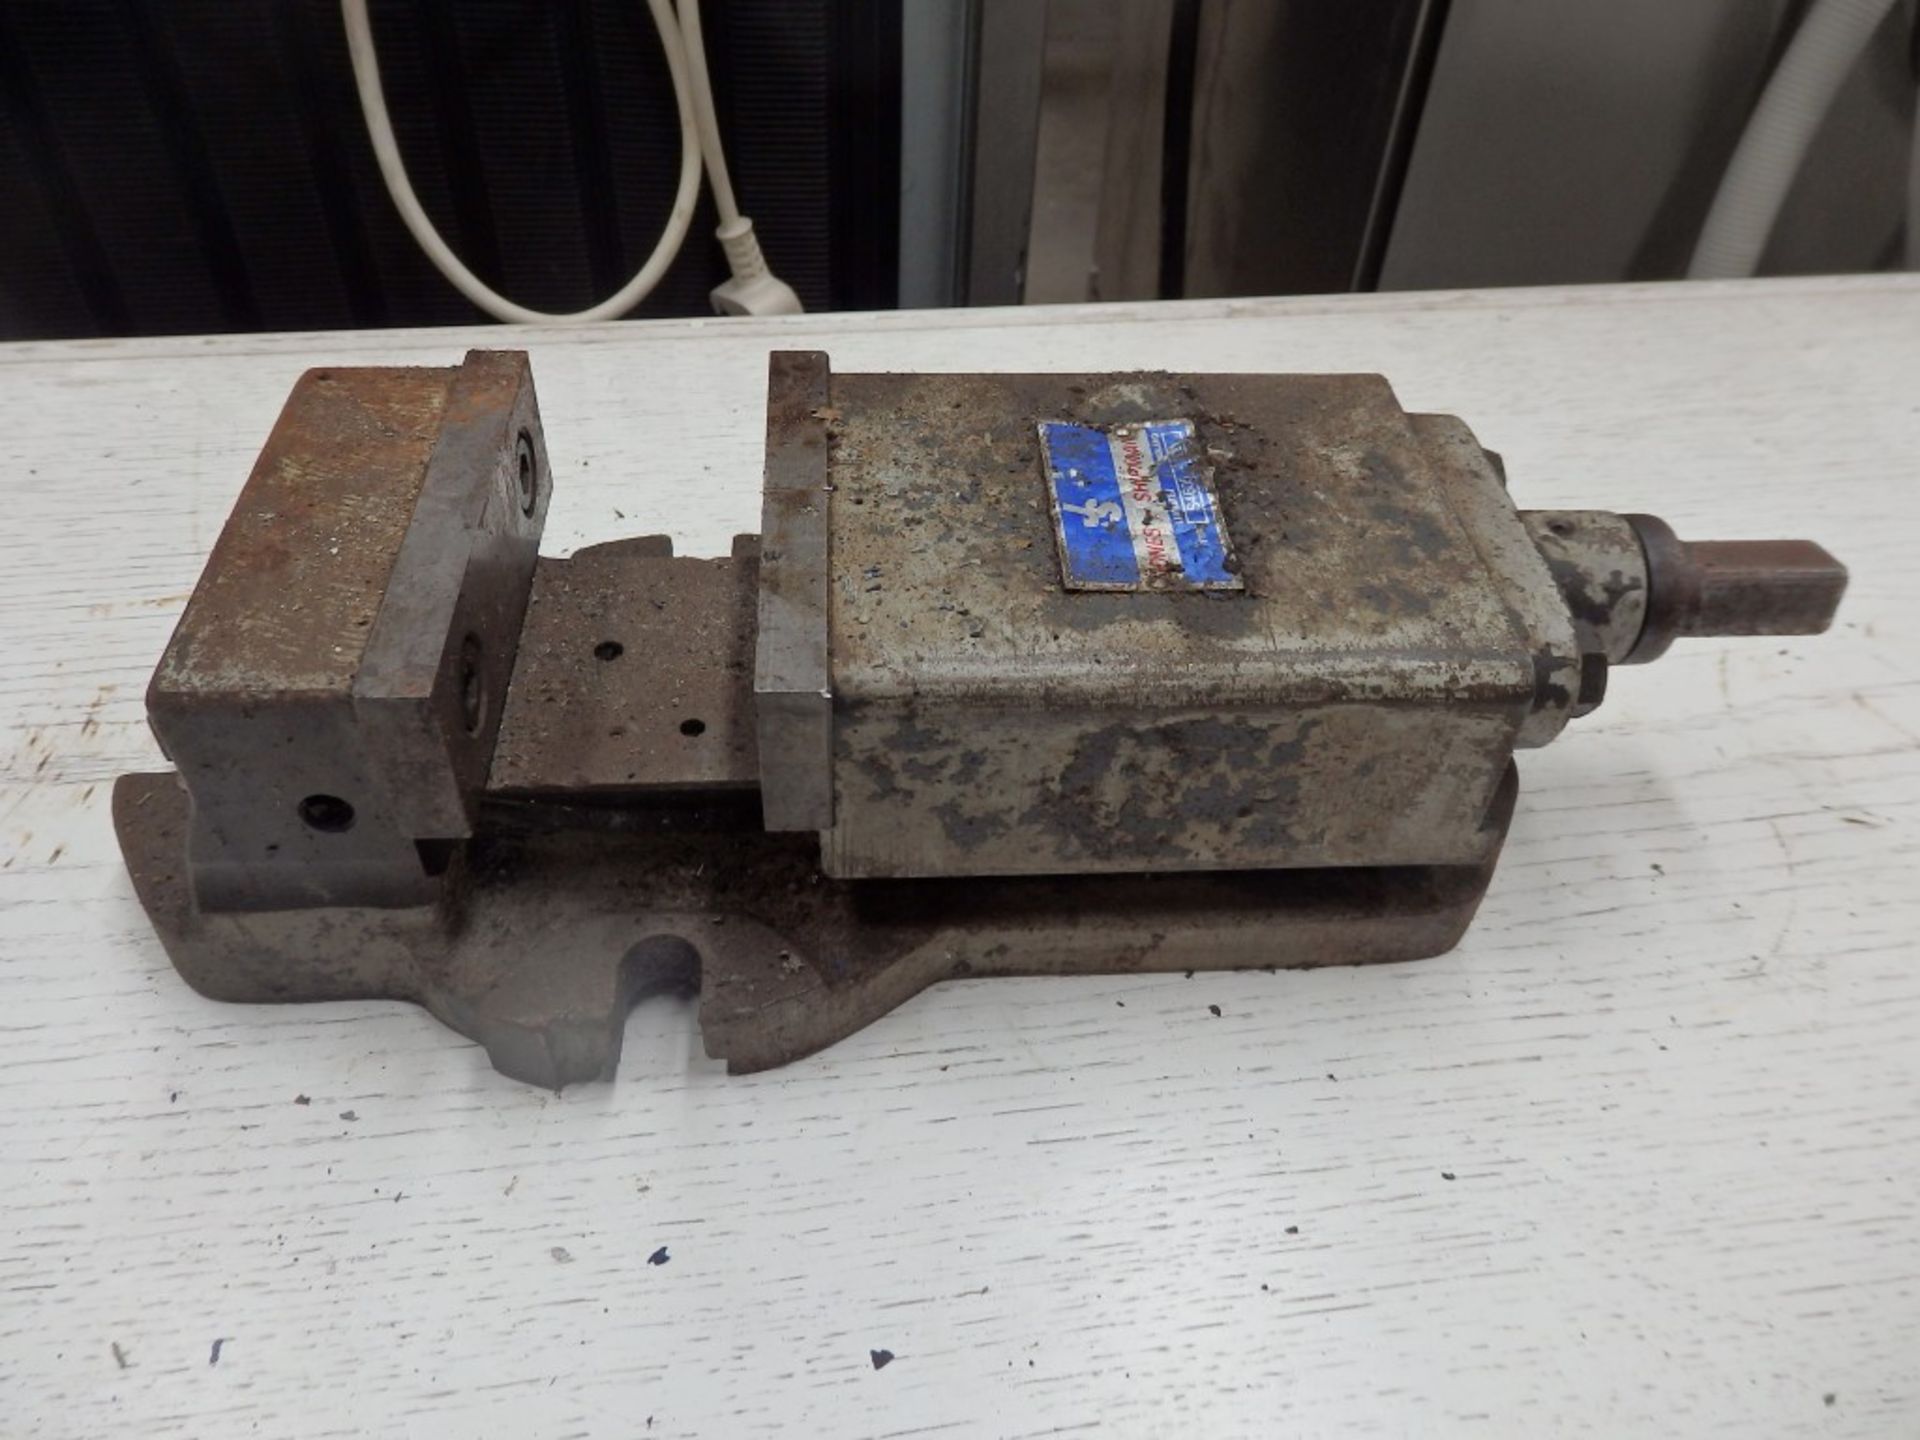 1 x Machine Vice - Perfect For Precise Workholding - Used - Ref WPM074/583 - CL057 - Location: - Image 2 of 3